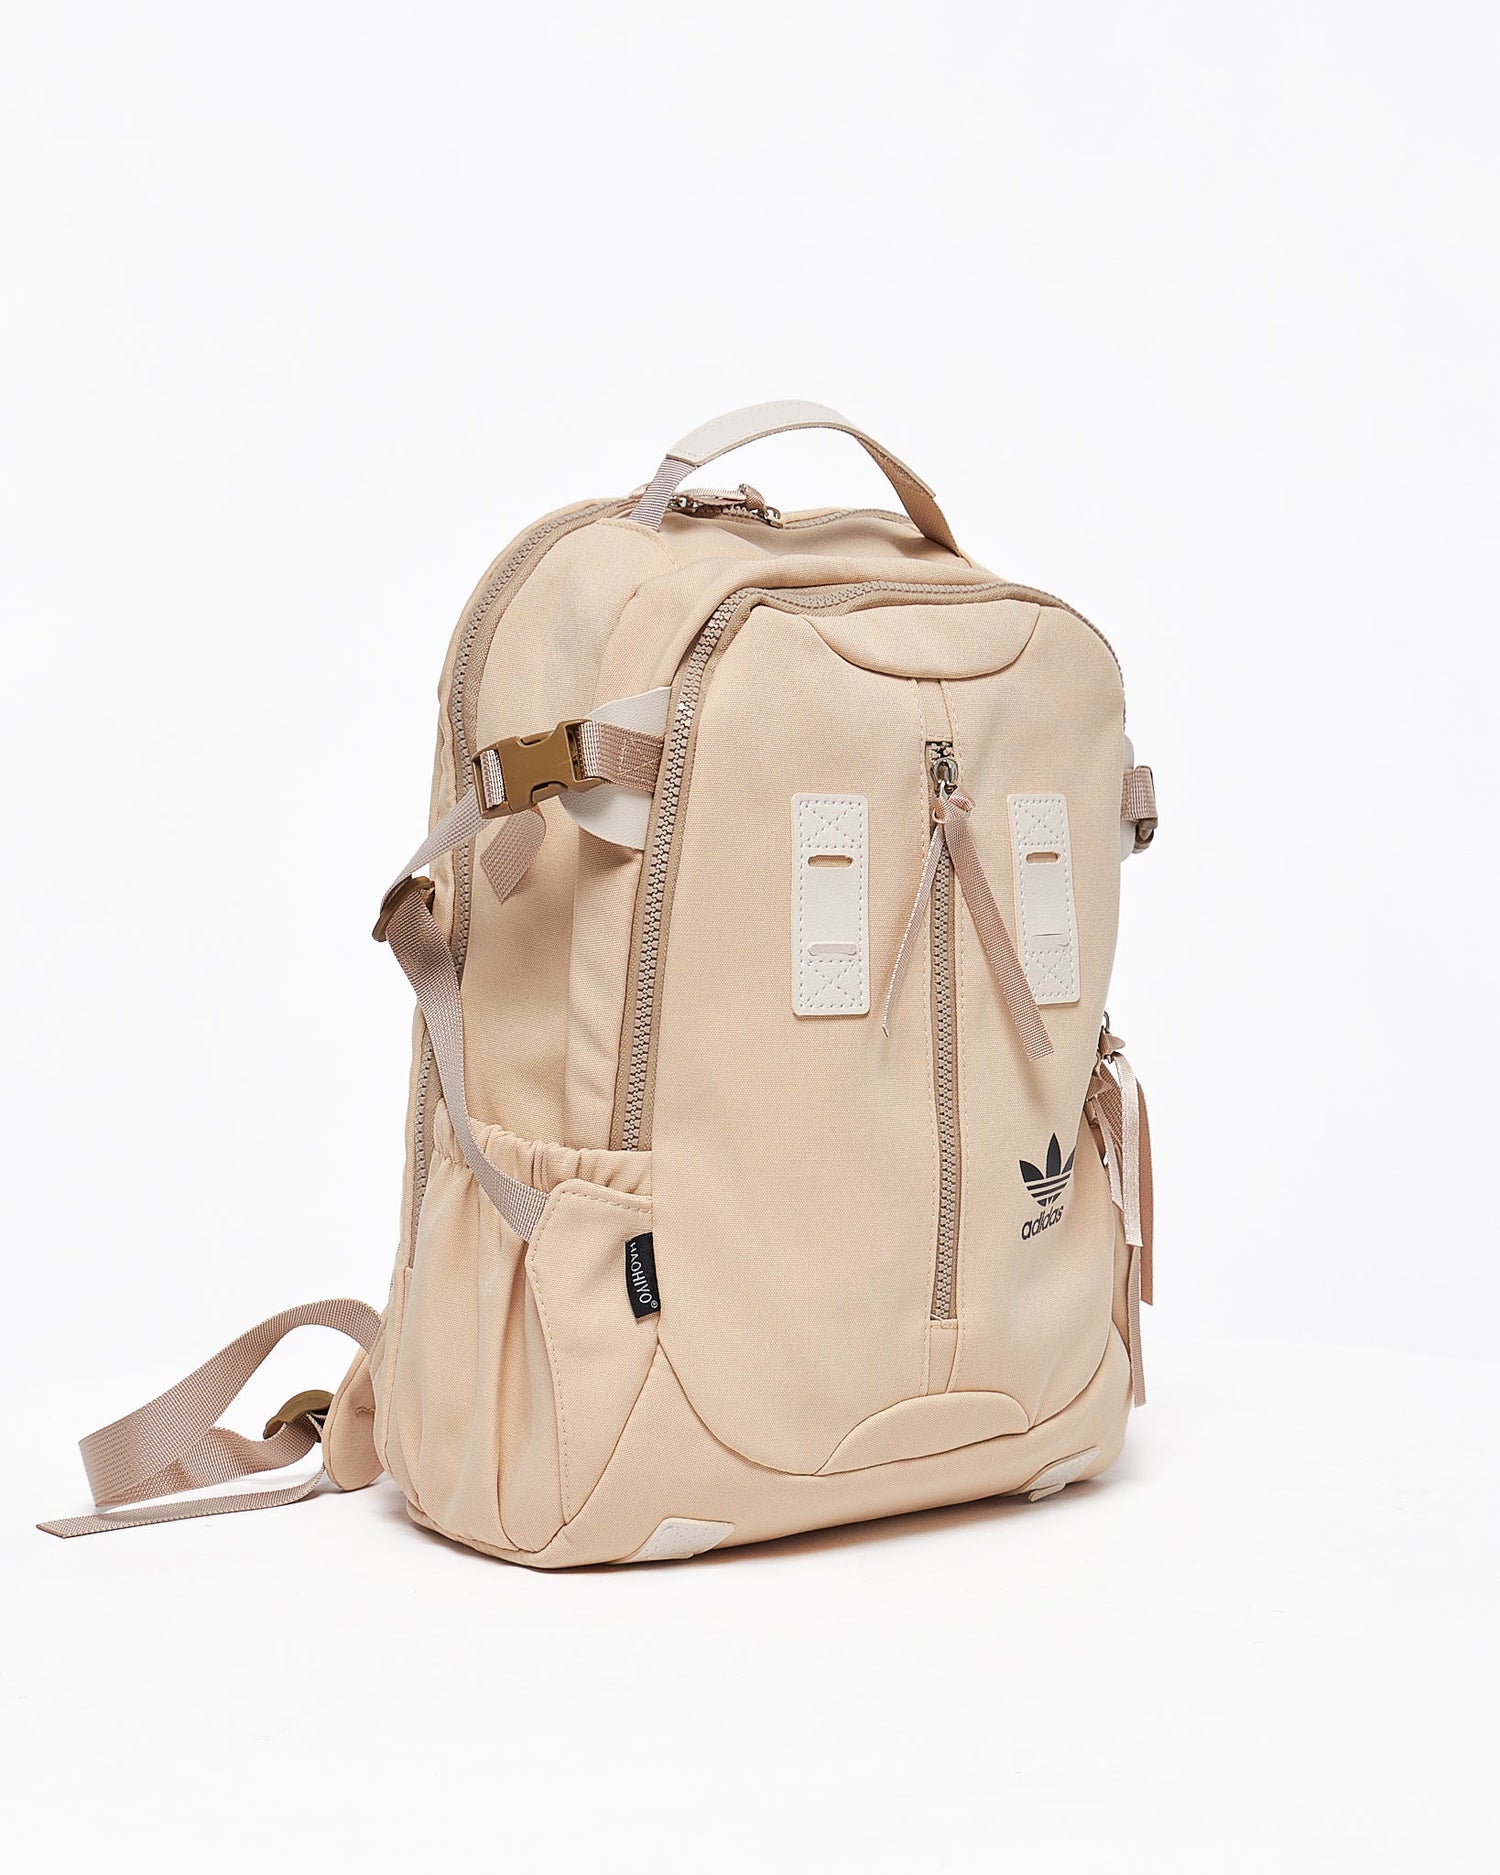 MOI OUTFIT-AD Logo Printed Unisex Backpack 29.90